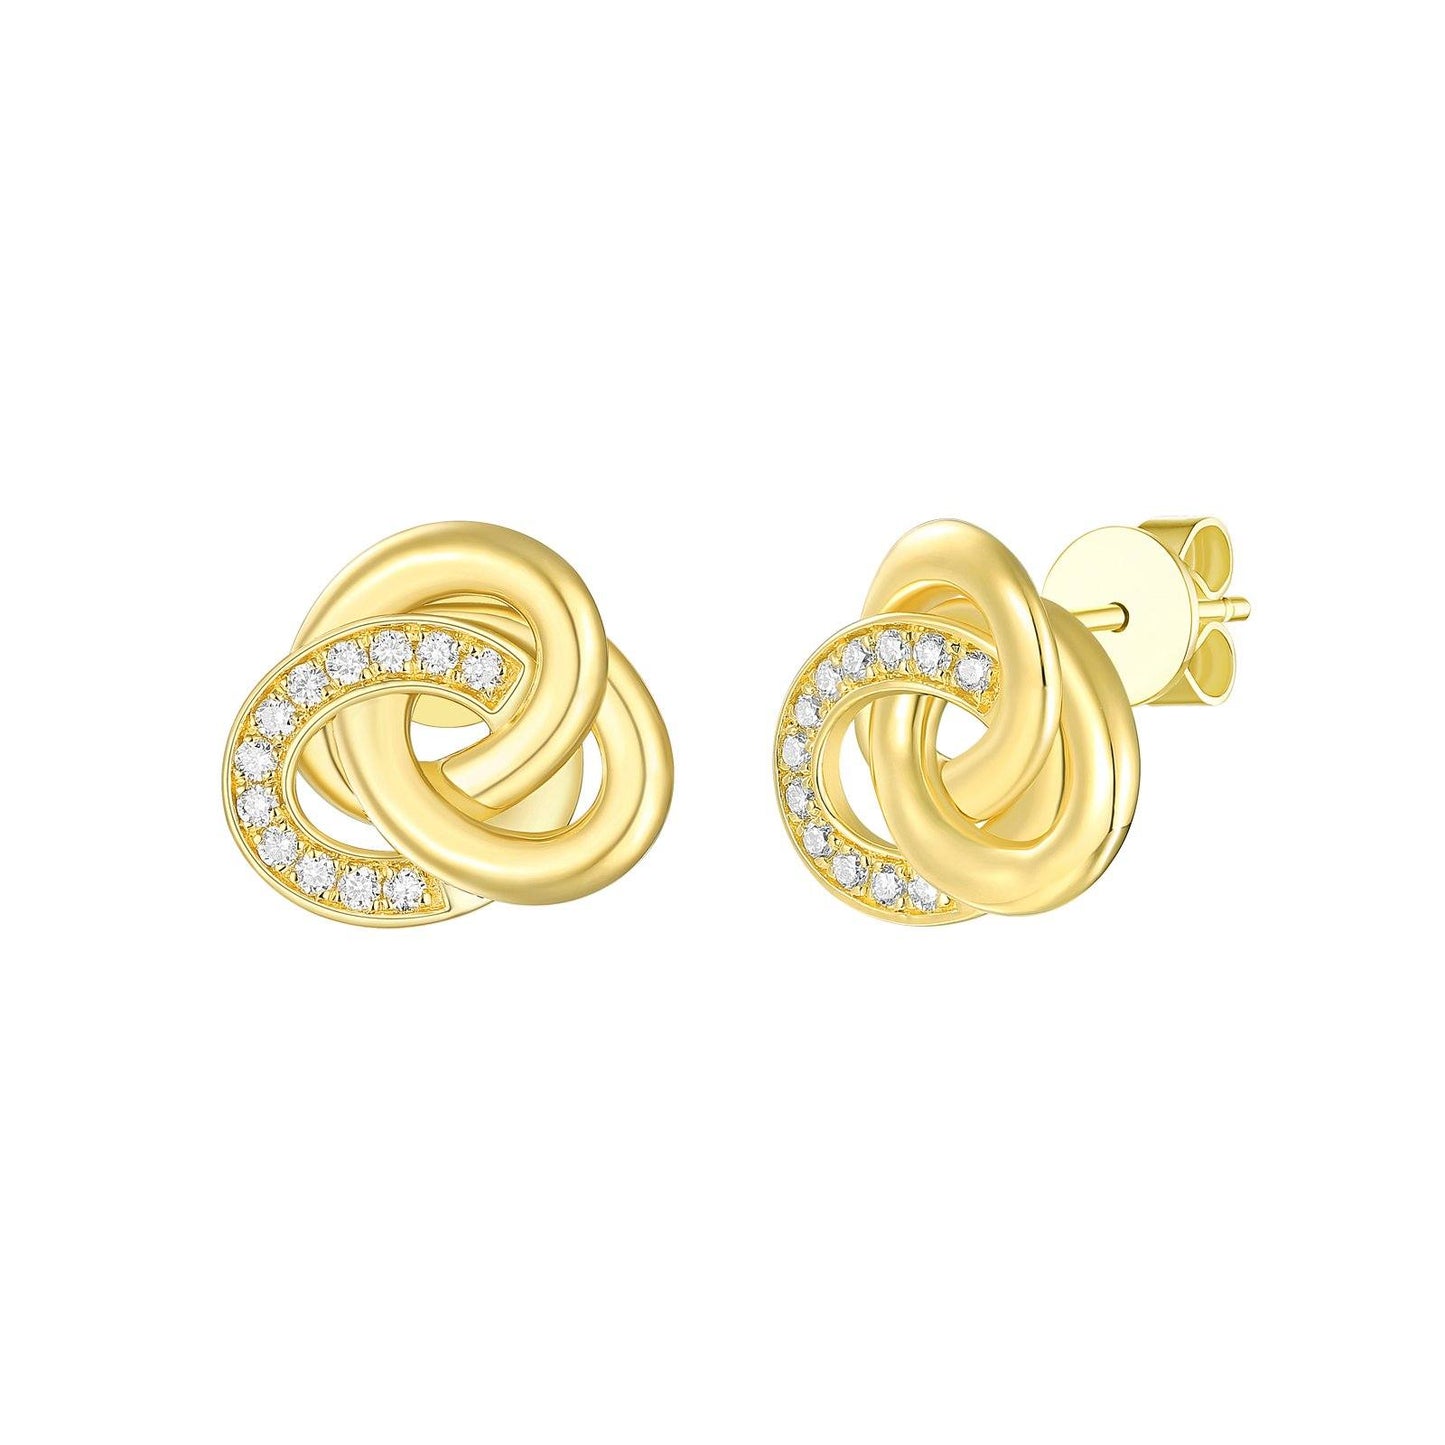 Limitless Collection Lab Grown Diamond Stud earrings Analucia Beltran Diamonds 14 kt yellow gold plated